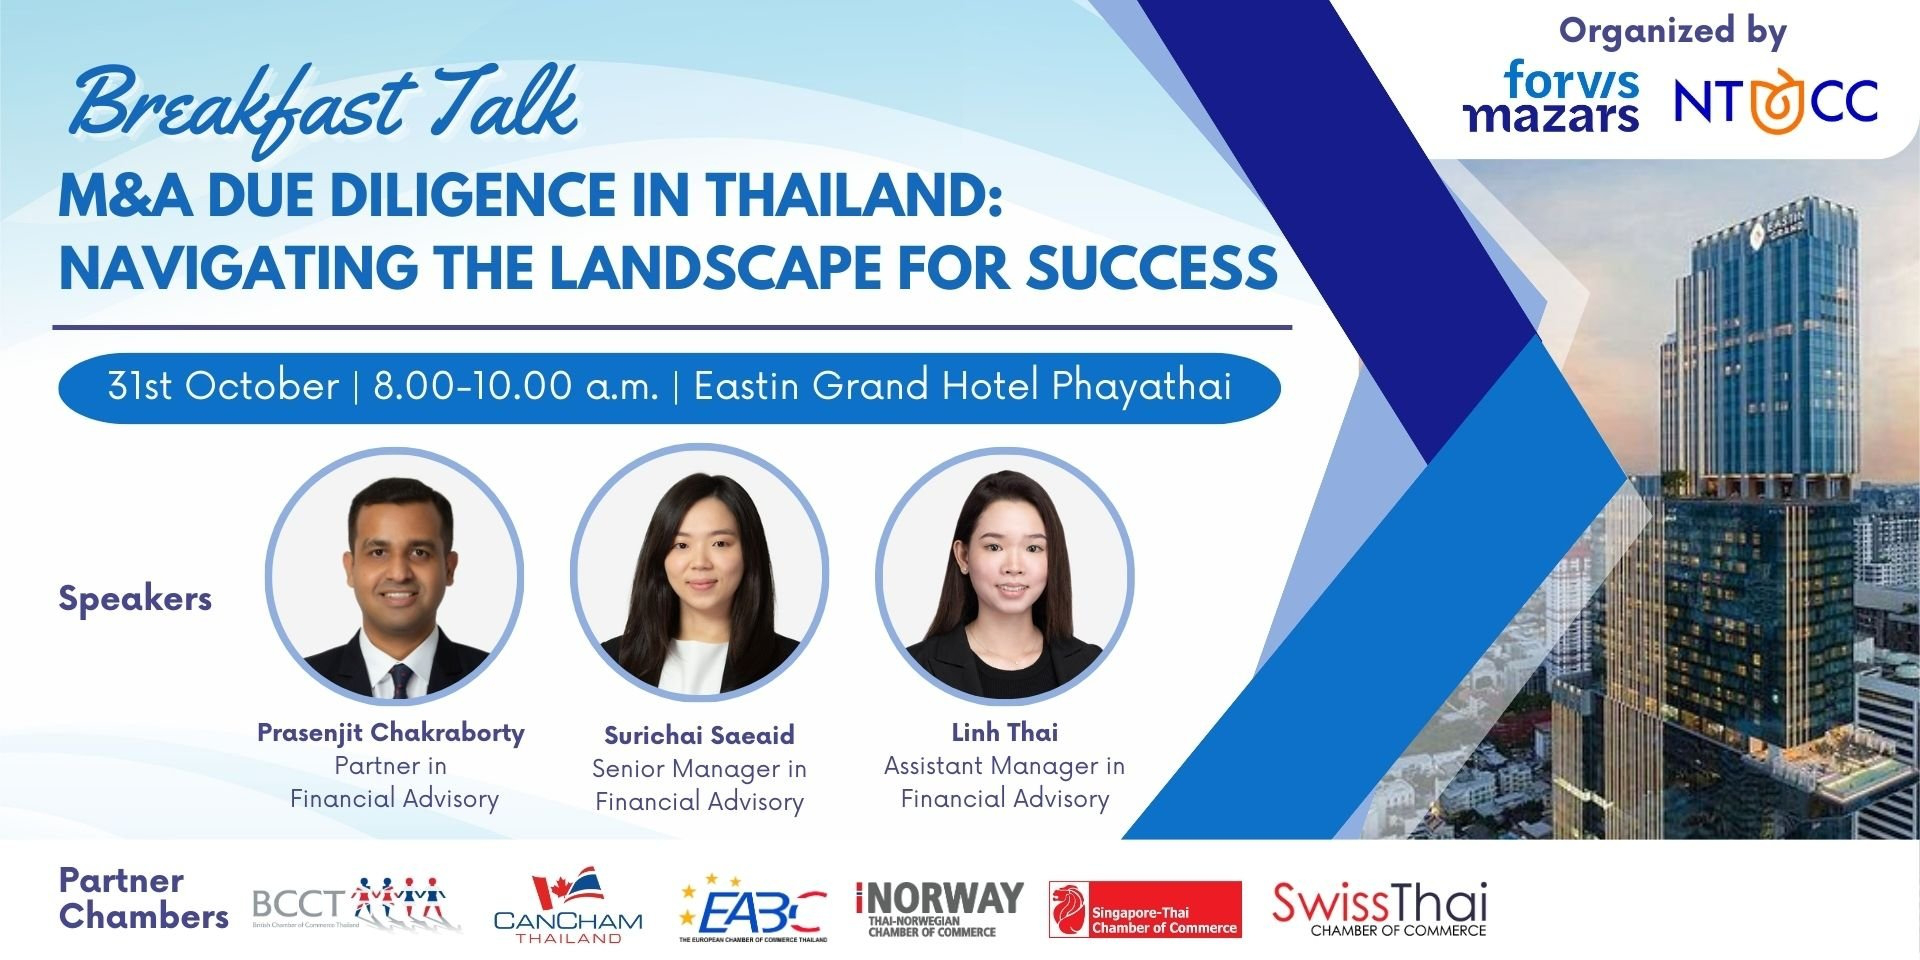 thumbnails Breakfast Talk: M&A Due Diligence in Thailand: Navigating the Landscape for Success